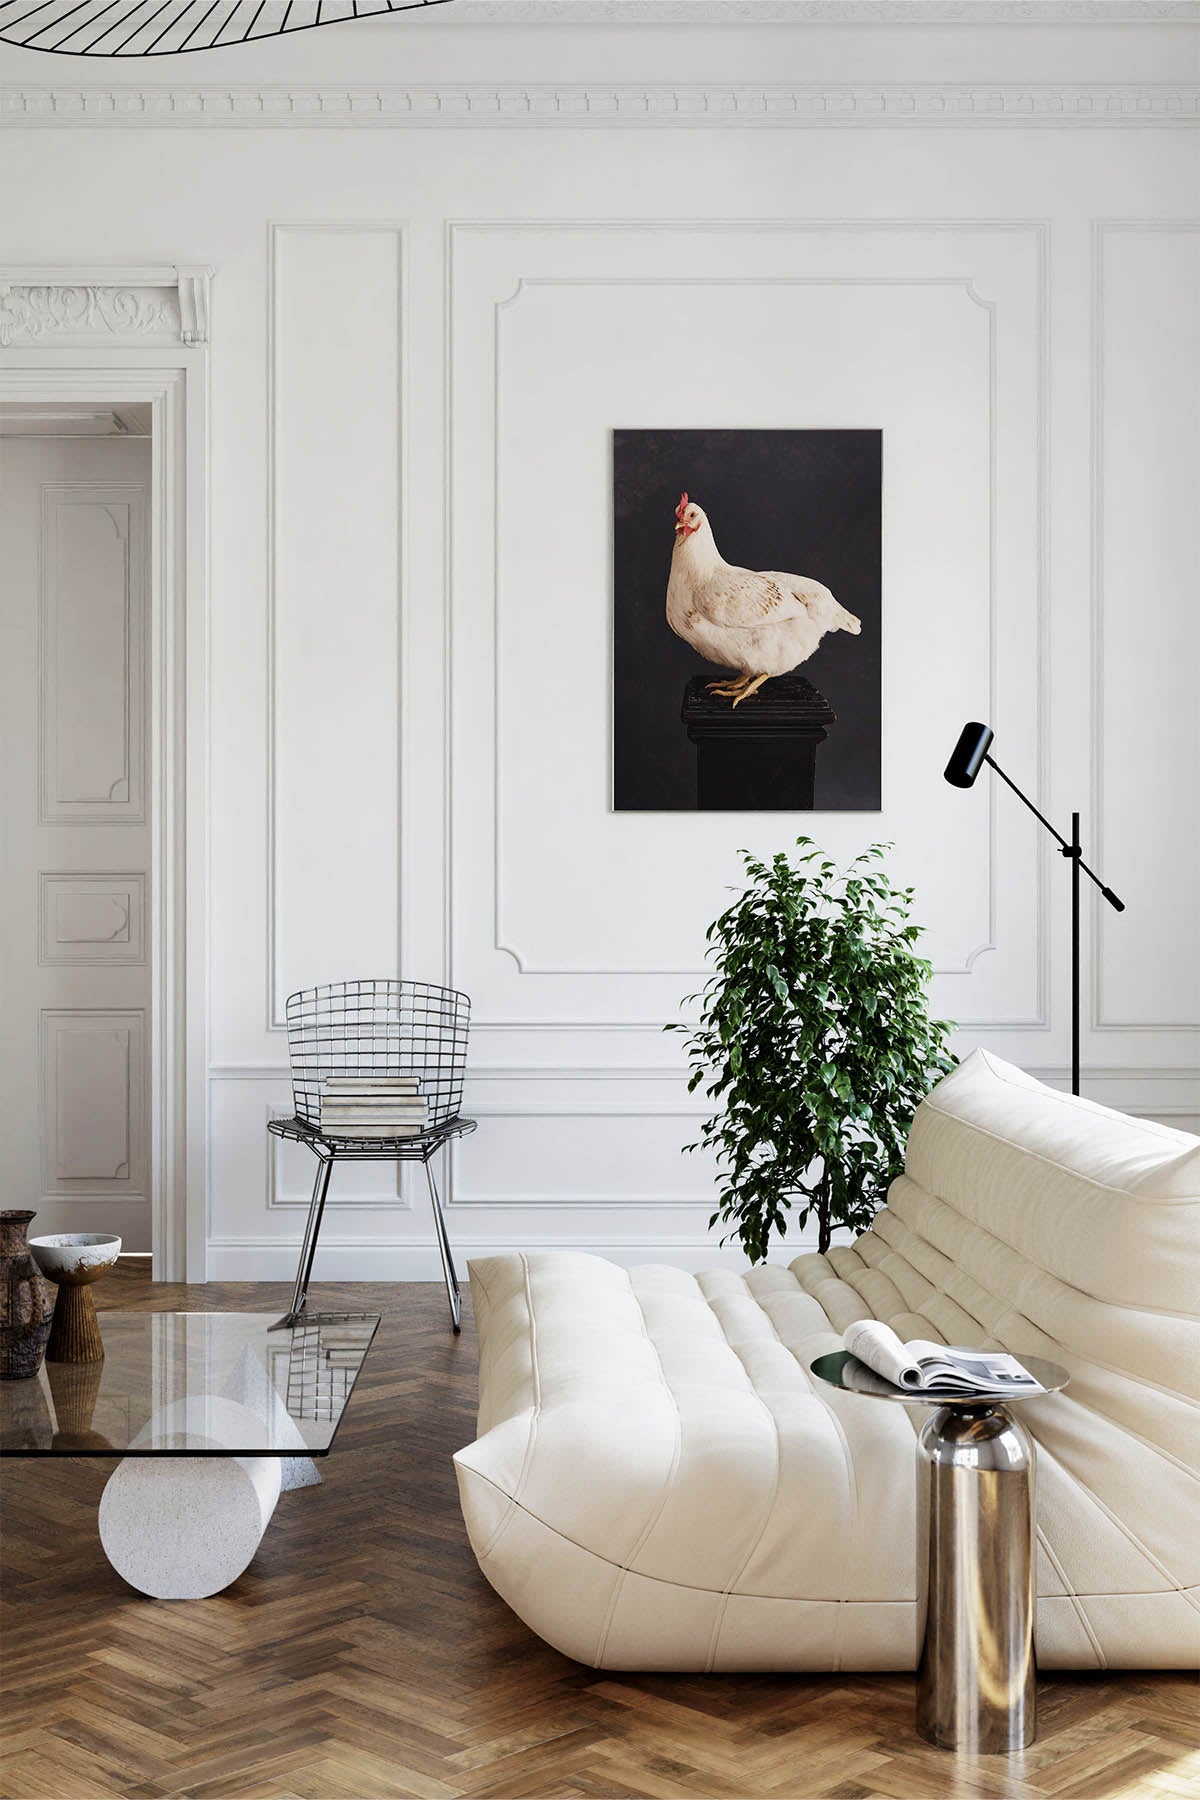 Fine Art Print Of A White Chicken Standing On A Black Plinth With A Black Background Framed On A Wall In An European Style Entry Way or Living Room Near A Harry Bertoia Mid Century Wire Chair and Cream Linge Roset Couch.